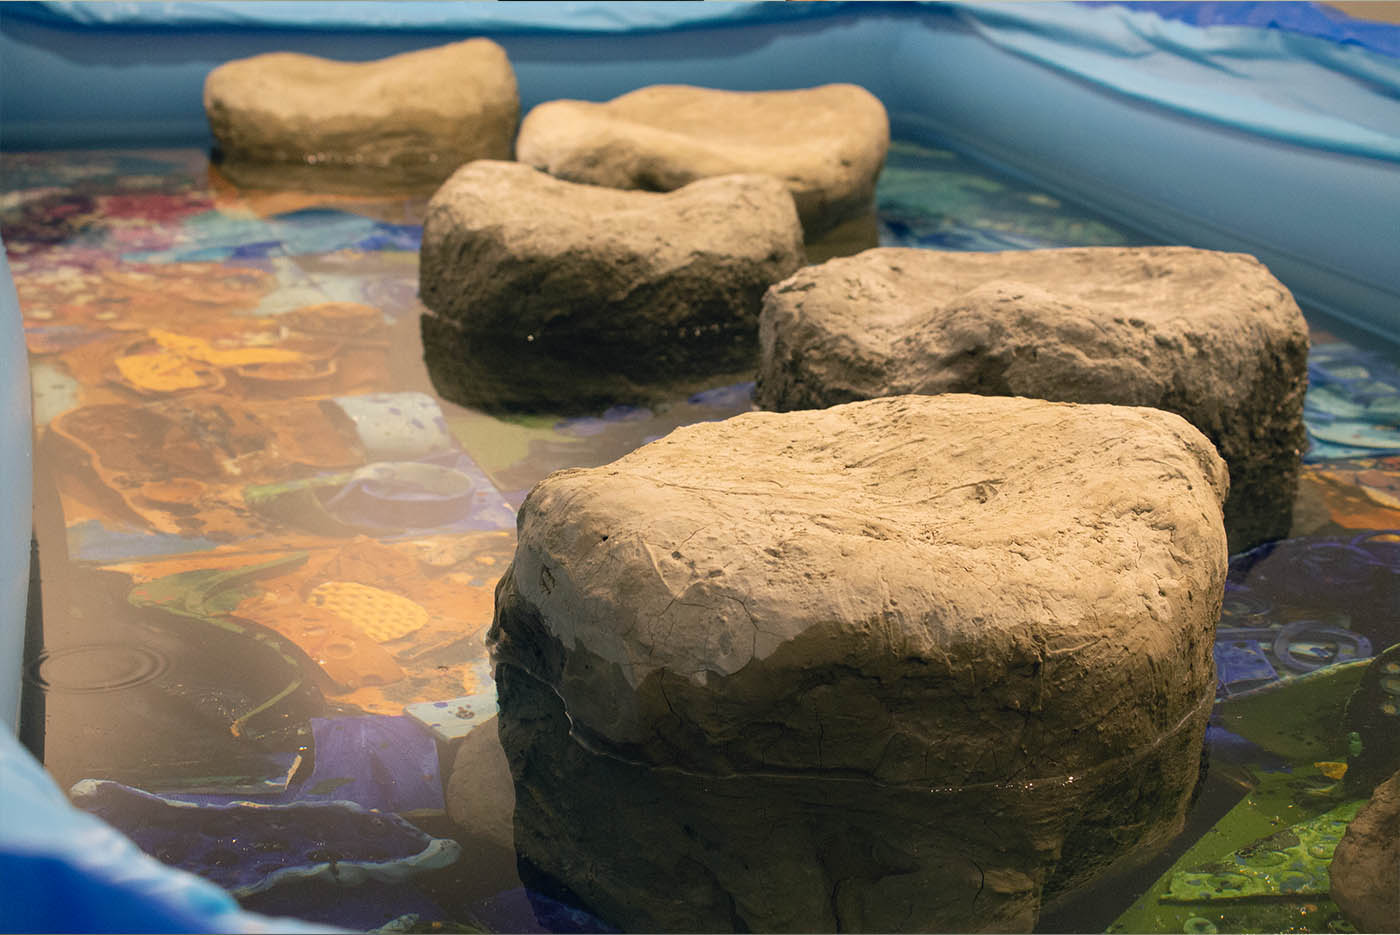 Detail of sculpture: ceramic tiles inside of a plastic pool, with water.